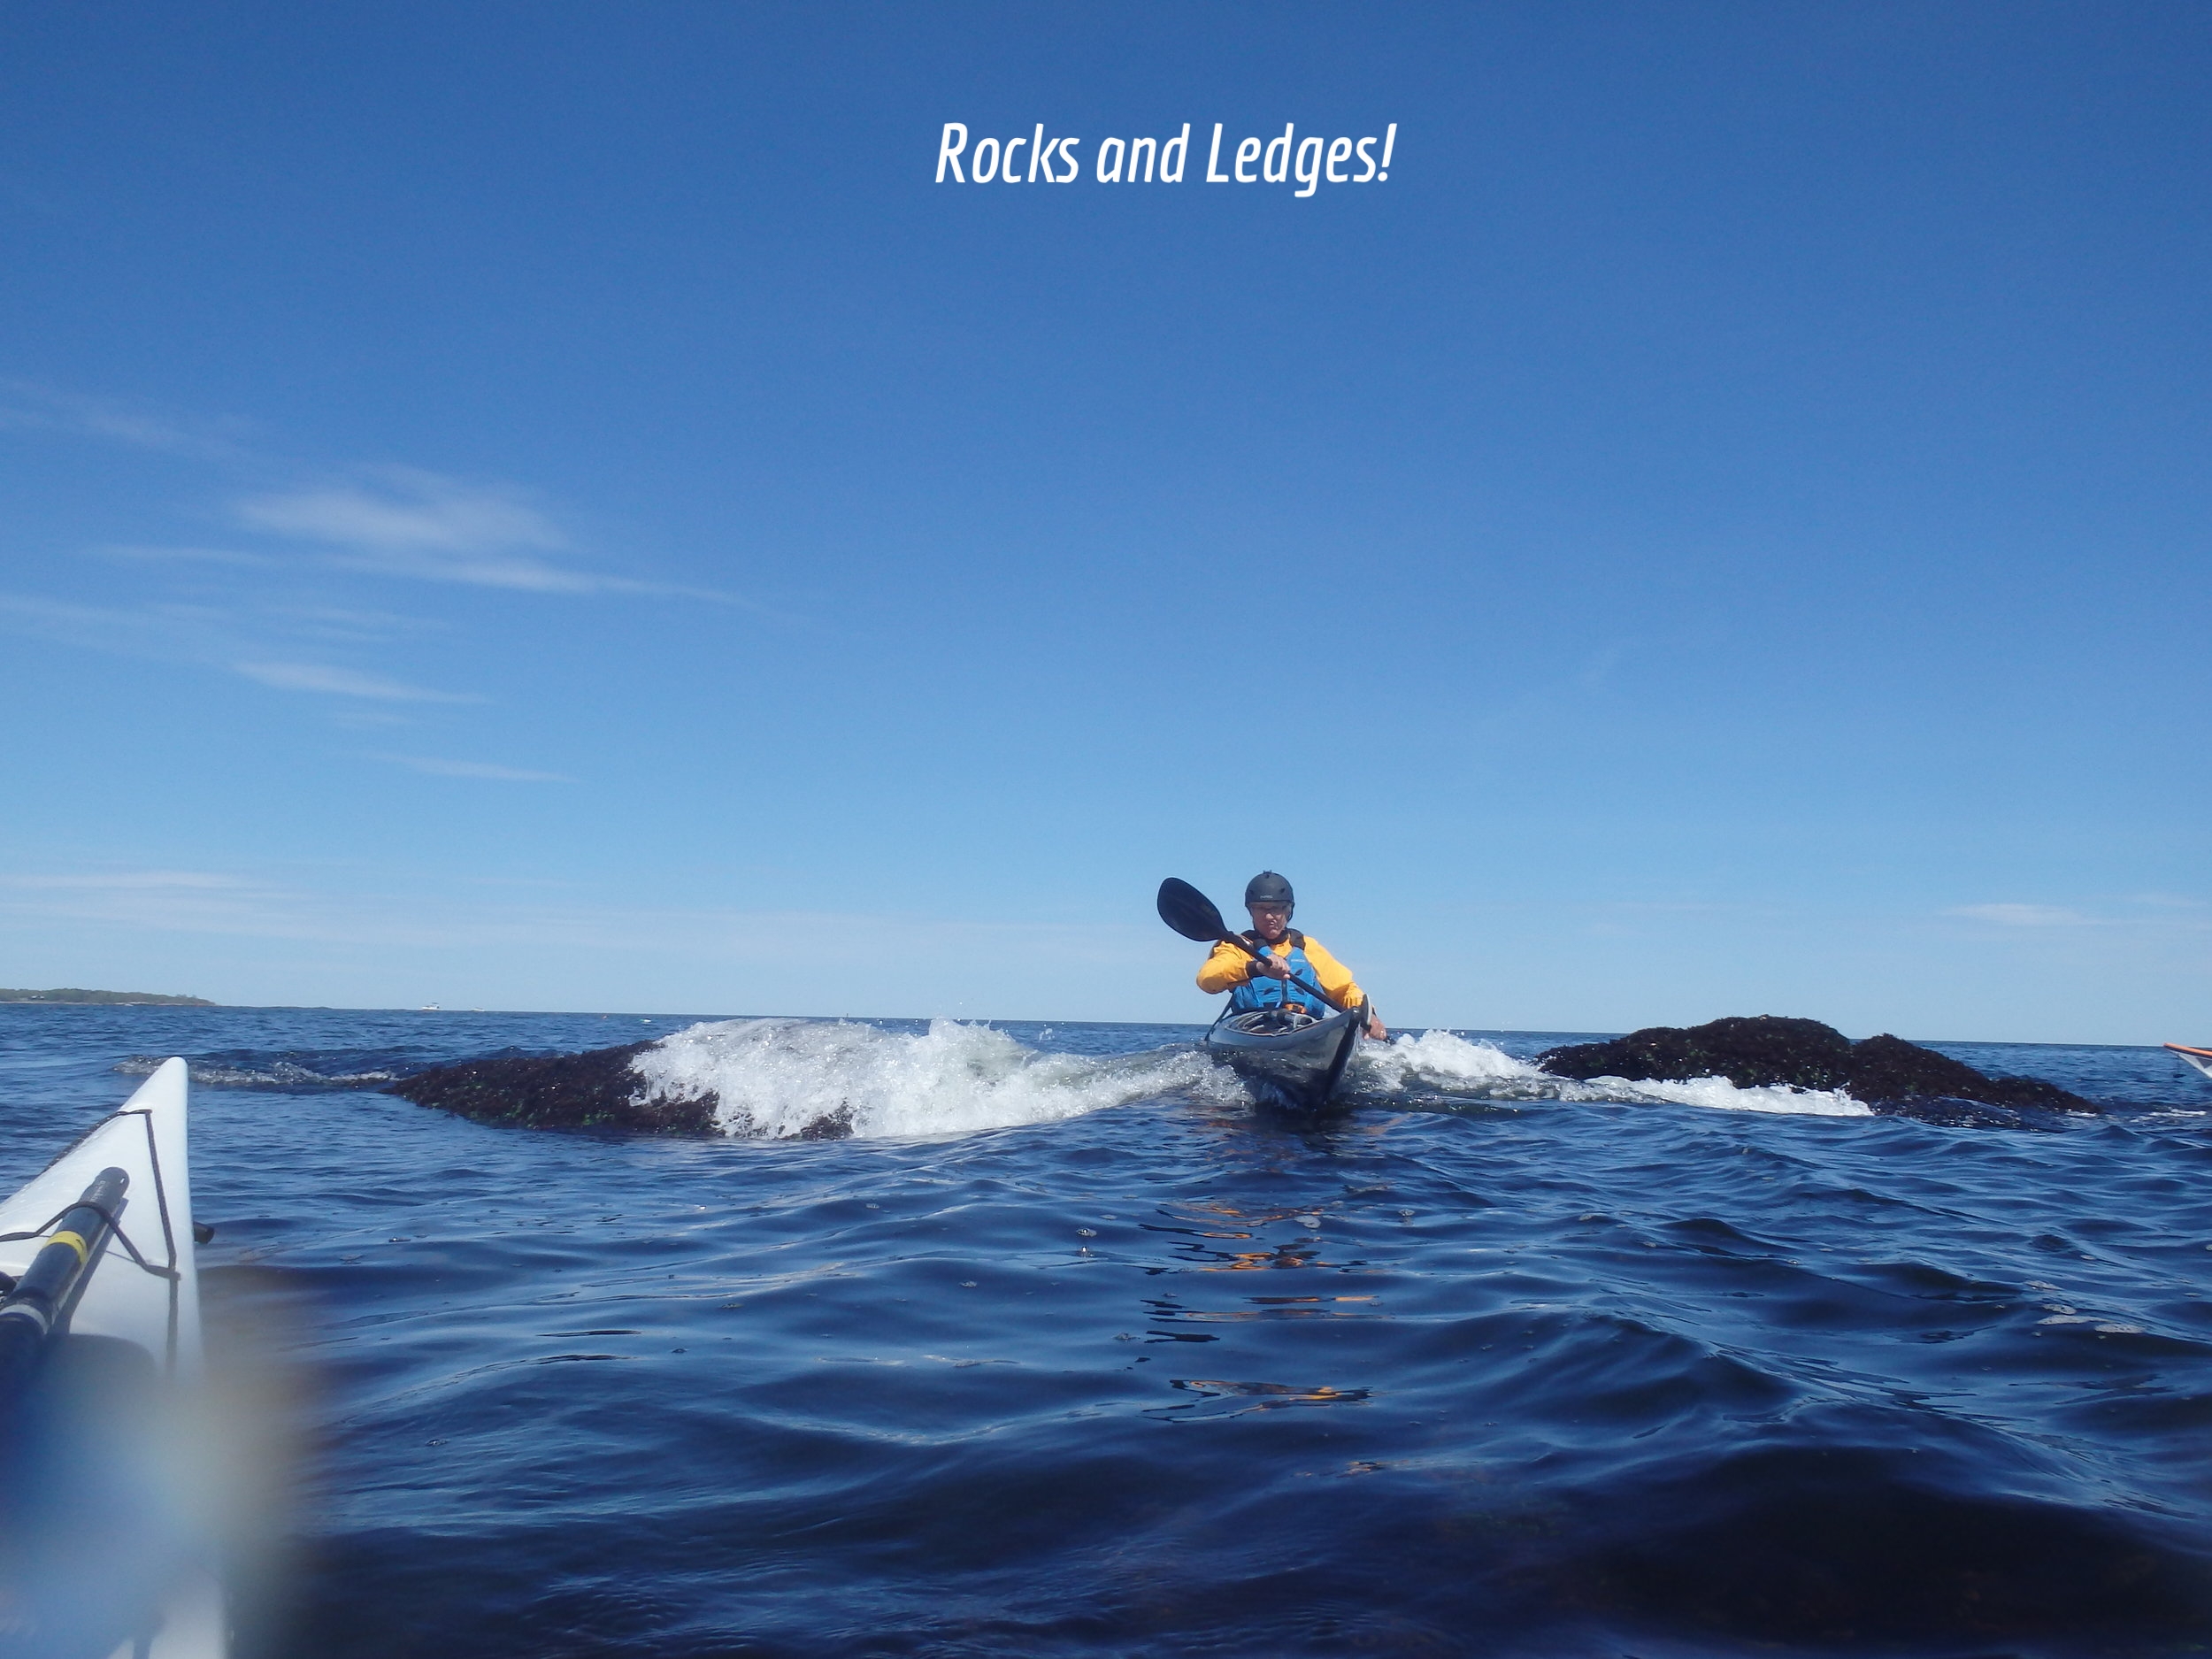  Sea-kayakers like to get up close to nature. Having the confidence and skills to maneuver close to shore as well as in and out of the rocks, will open your kayaking world. From reading the water to putting your strokes knowledge into practice, this 